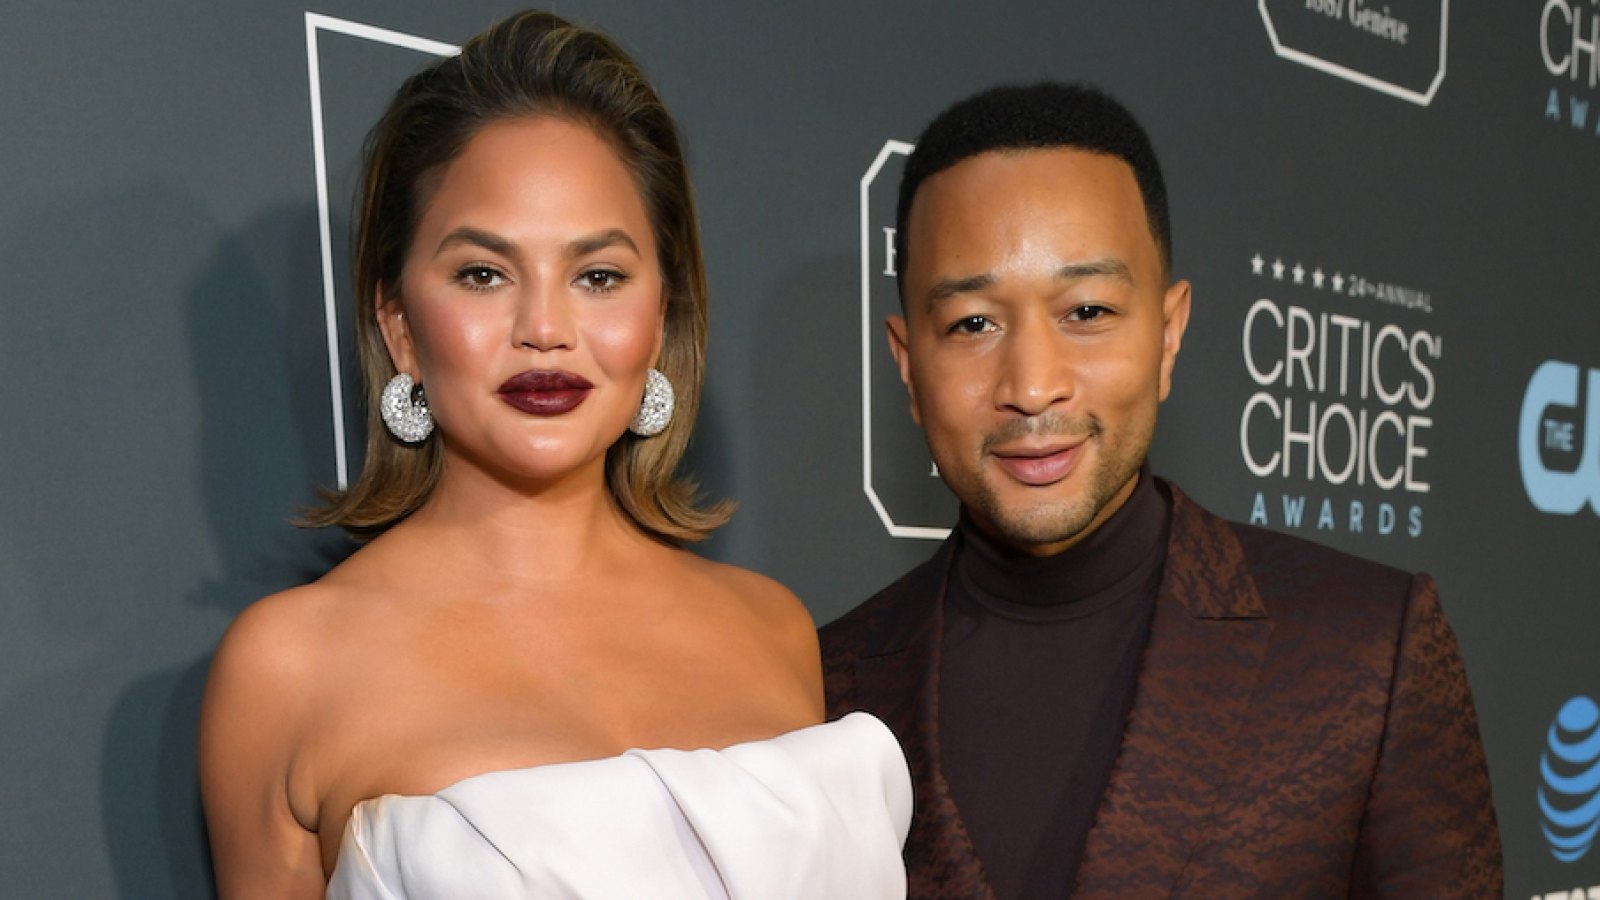 Chrissy Teigen and John Legend to Take on the ‘Vanderpump Rules’ Cast on ‘Family Feud’